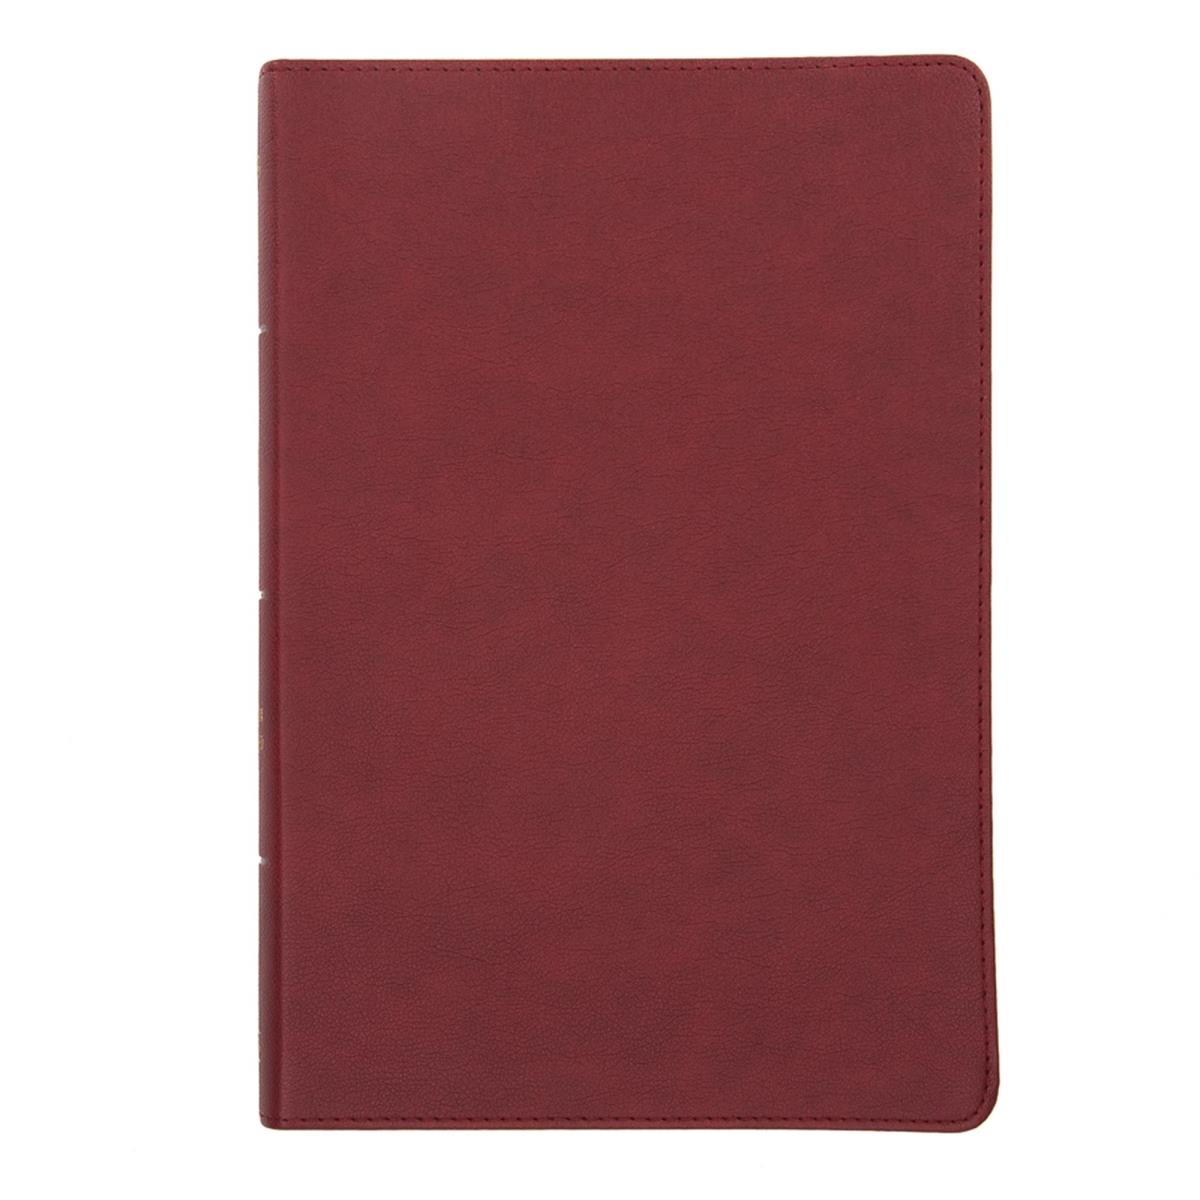 Picture of B&H Publishing 259633 NASB 2020 Giant Print Reference LeatherTouch Bible - Burgundy